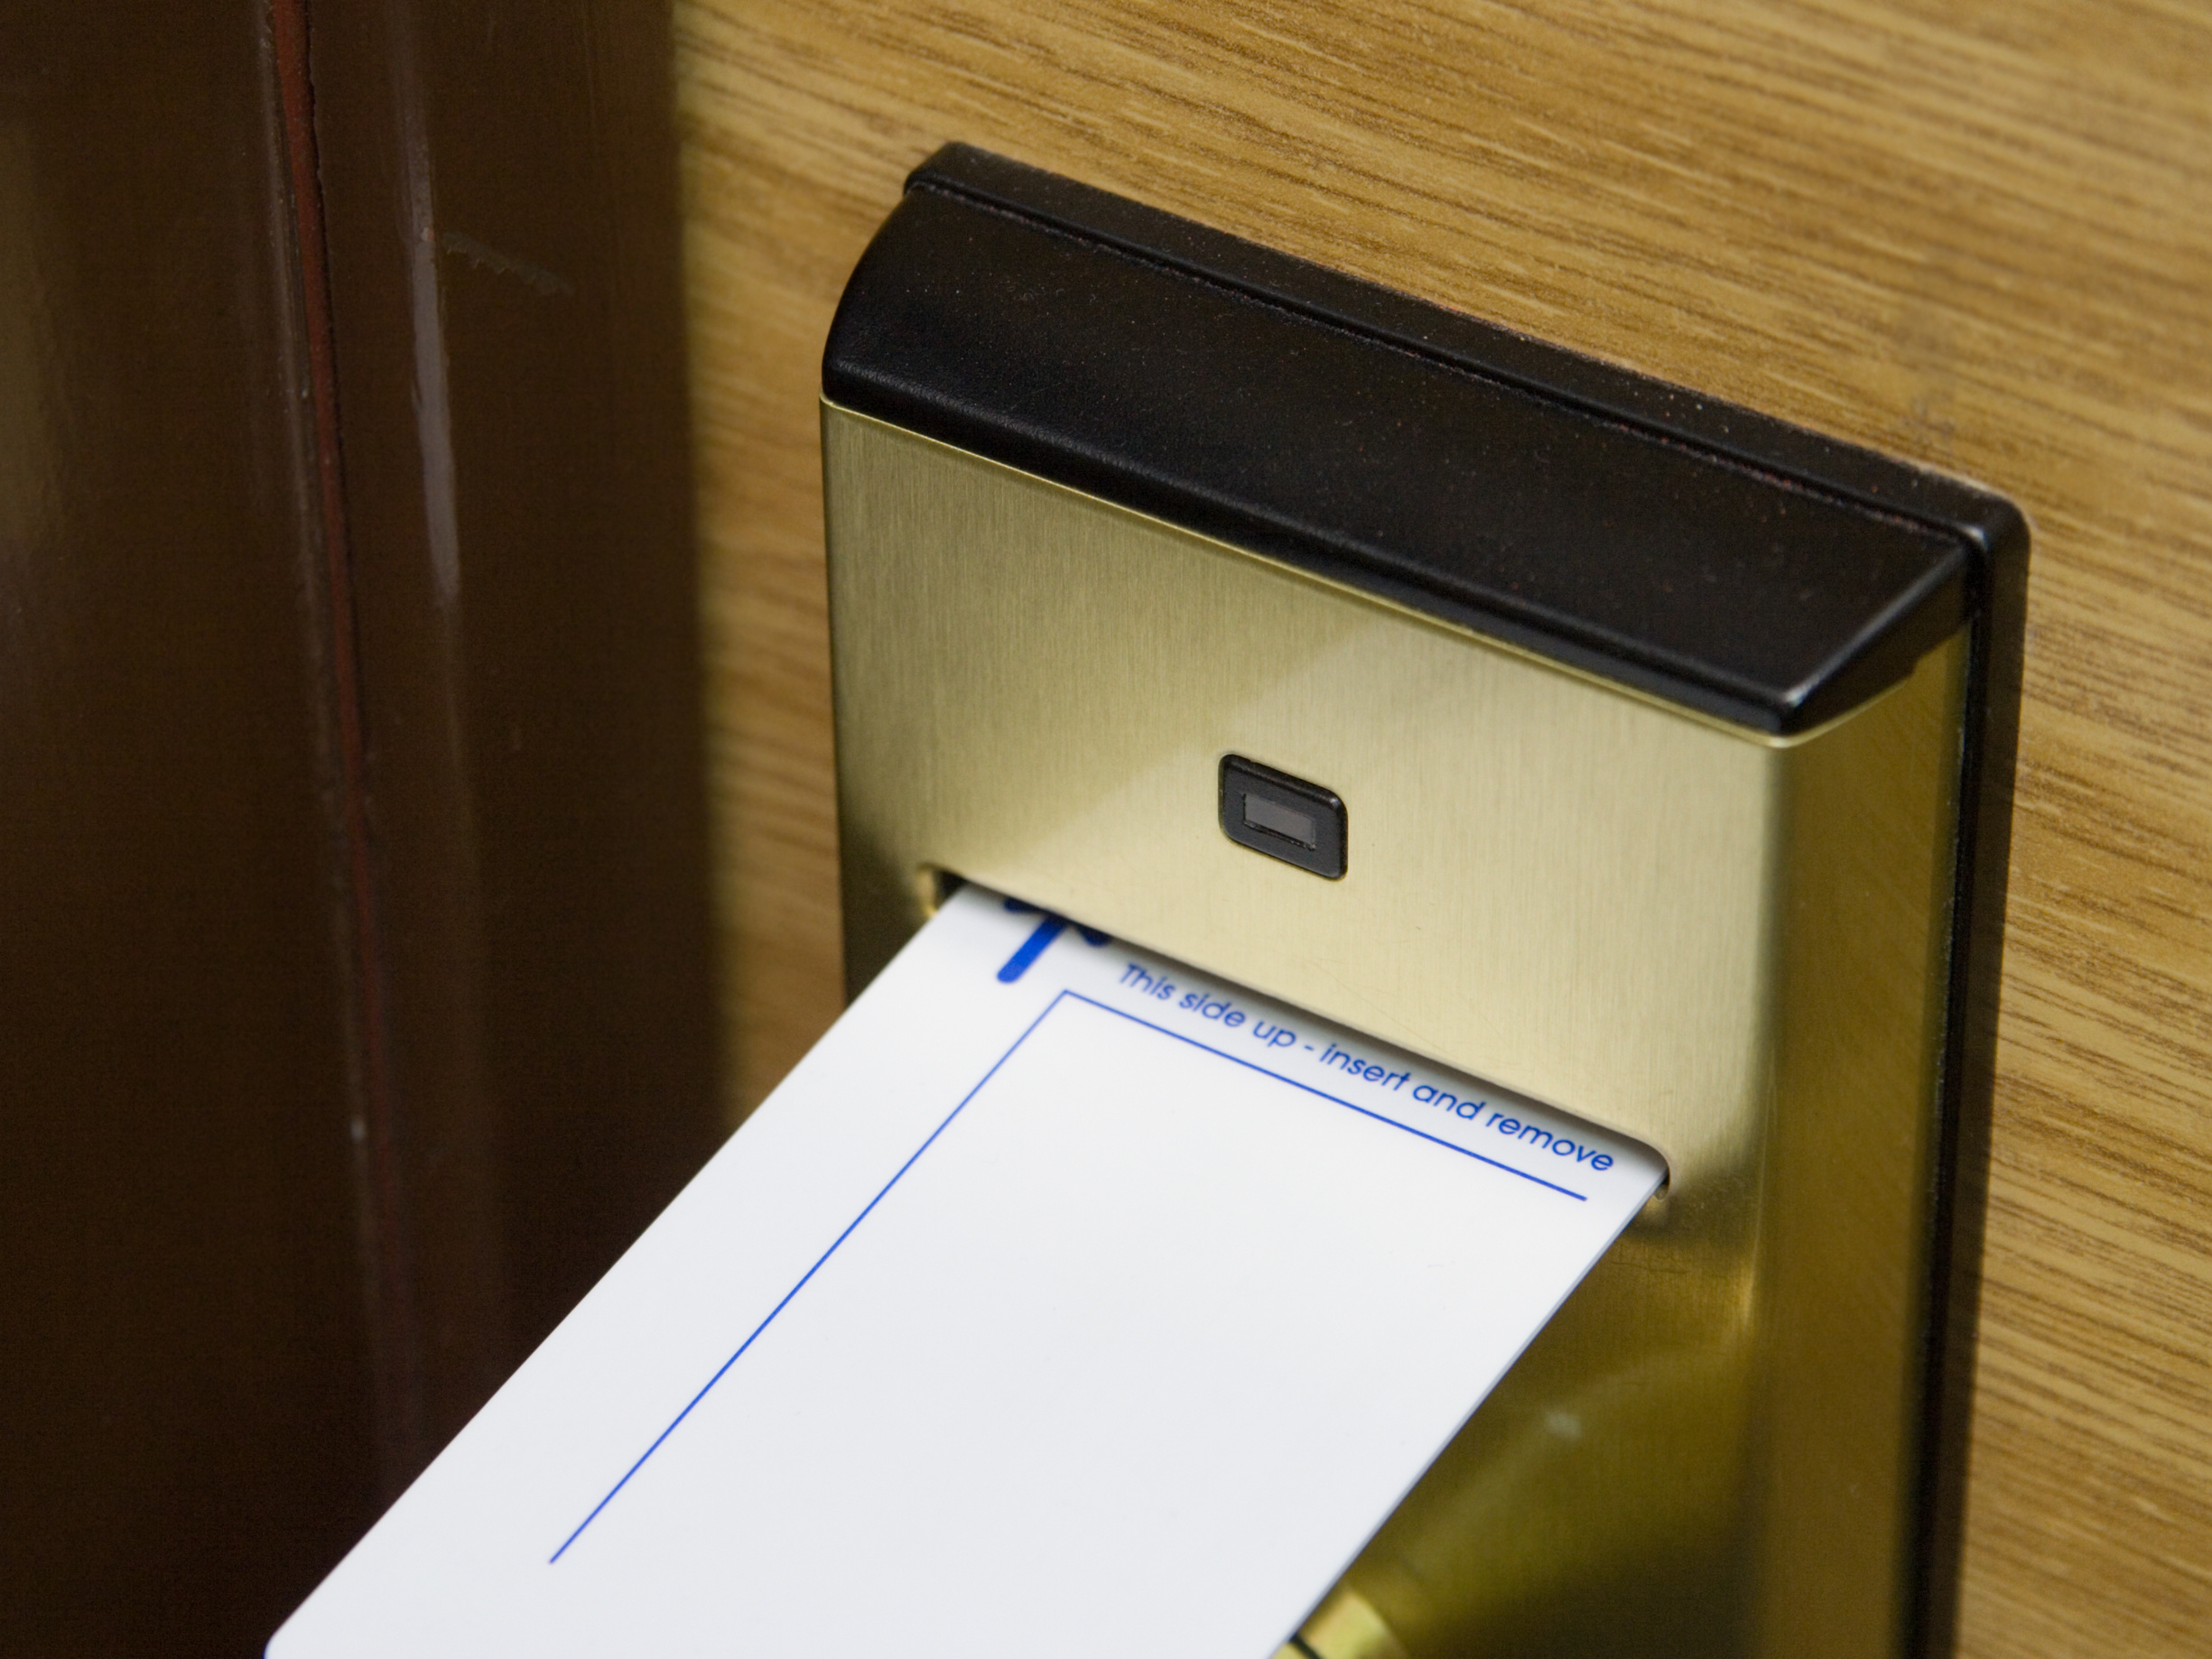 photo Key card systems that switch off electricity in rooms